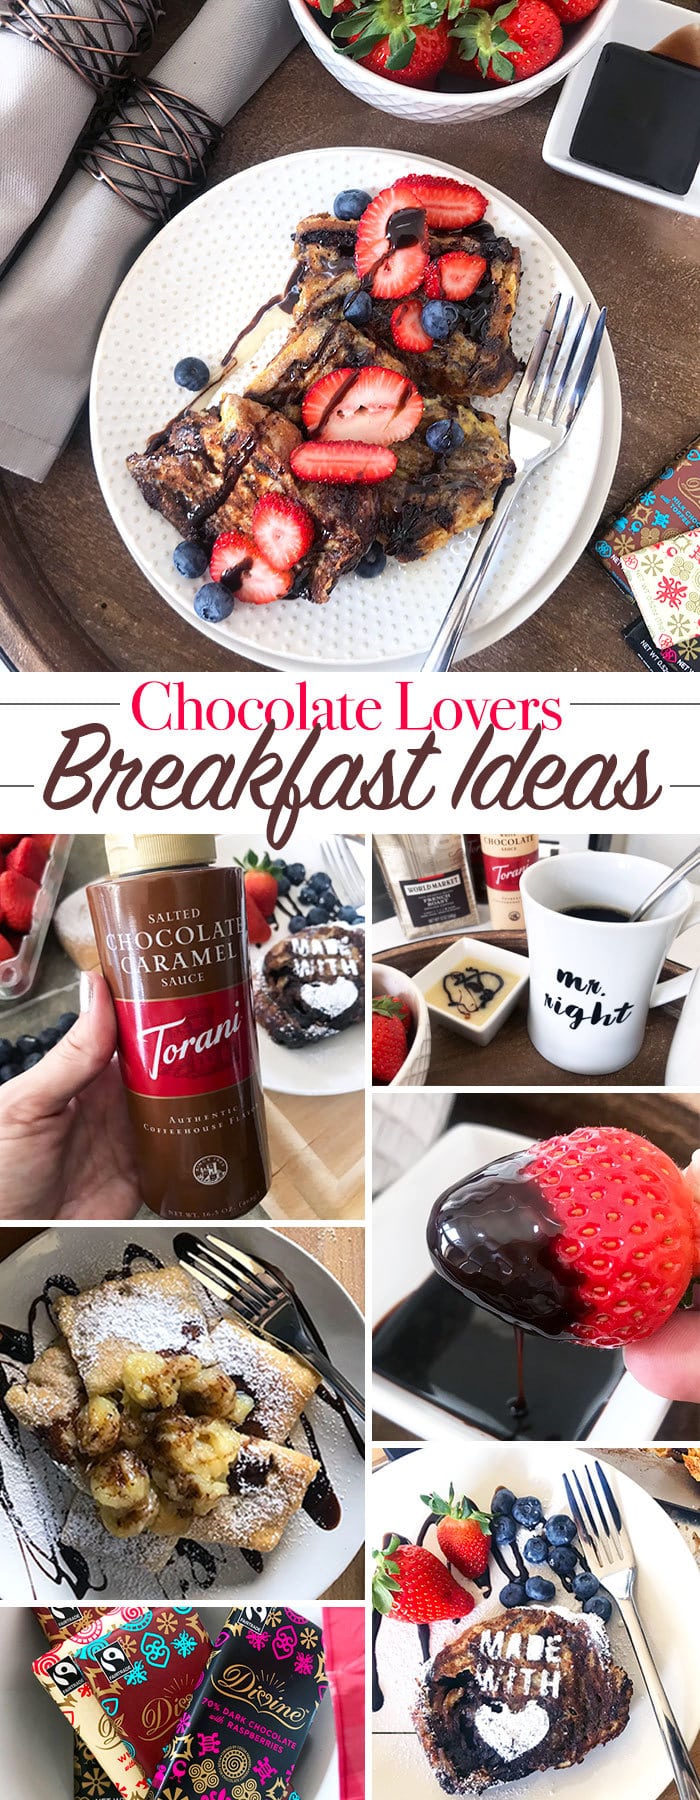 Chocolate Lovers breakfast ideas - gourmet flavors from Cost Plus World Market